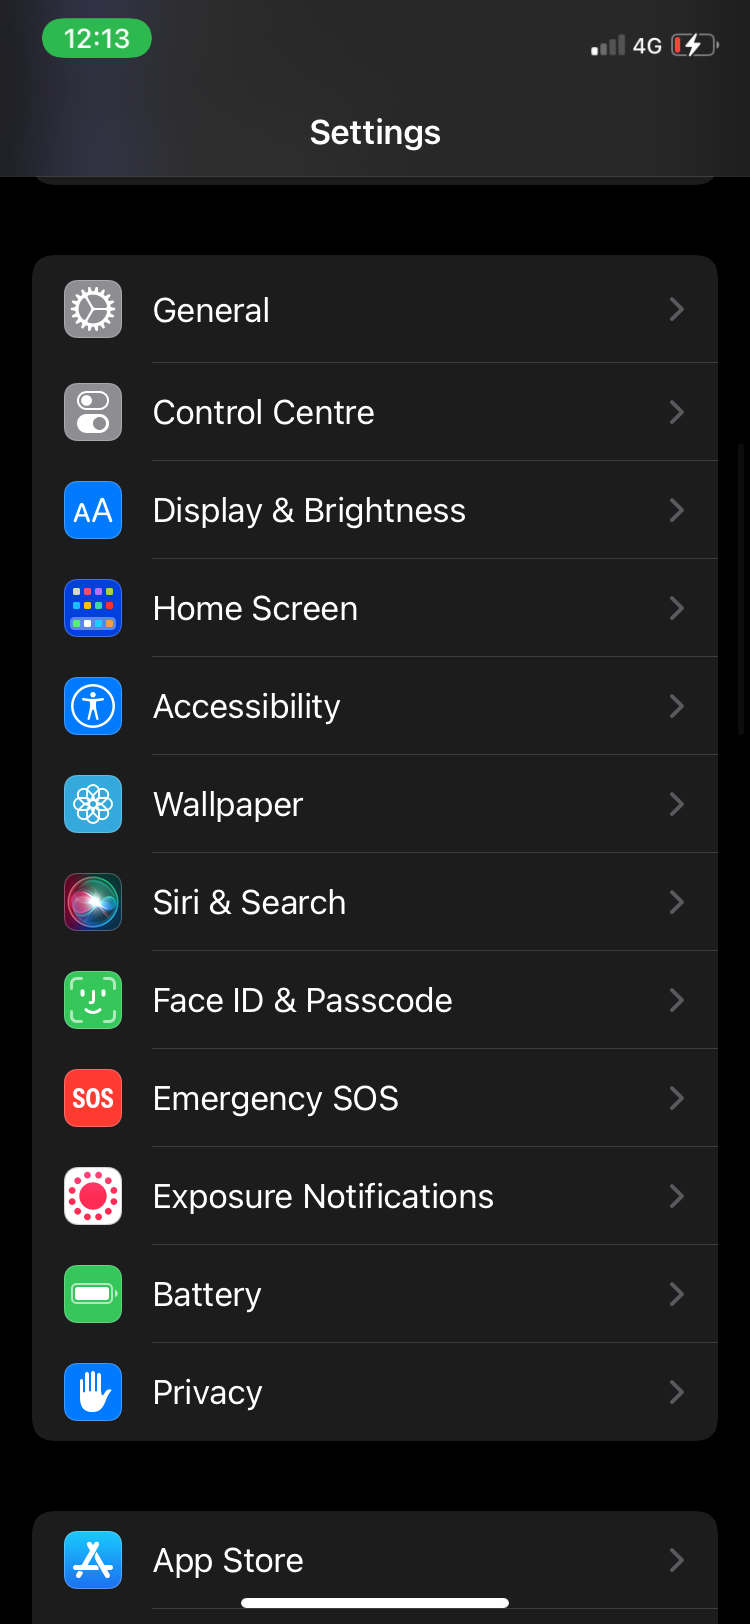 Accessibility in settings